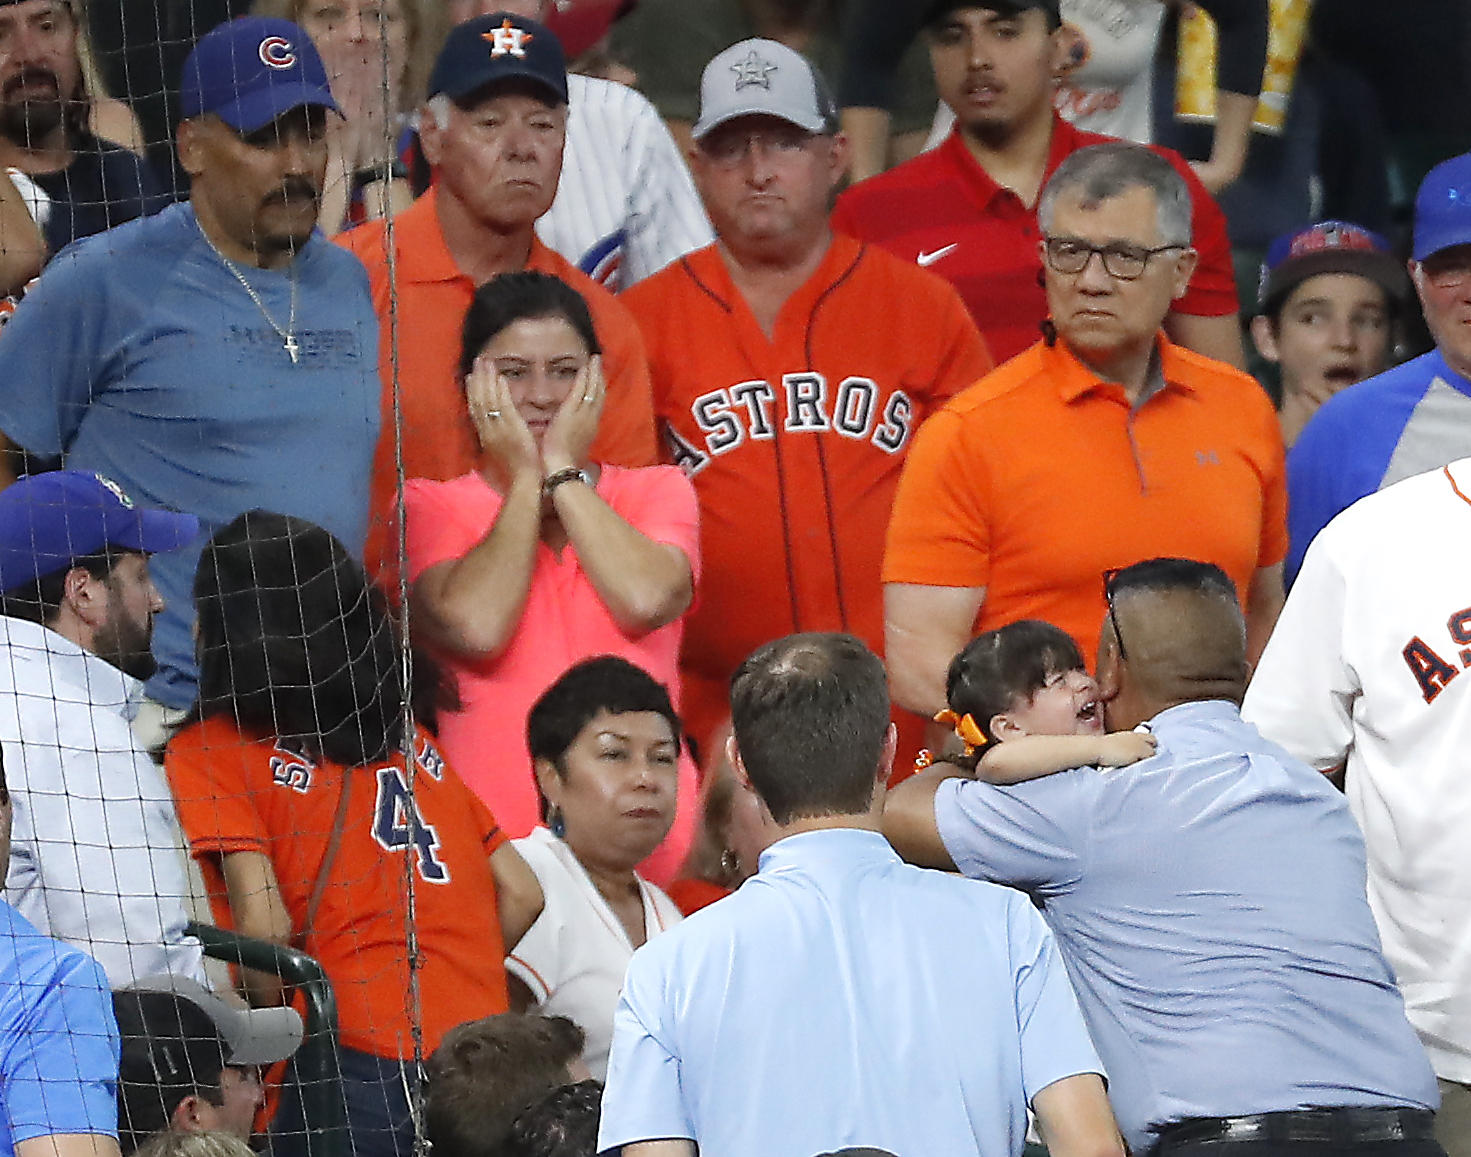 Child hit by line drive at Astros game, batter shaken